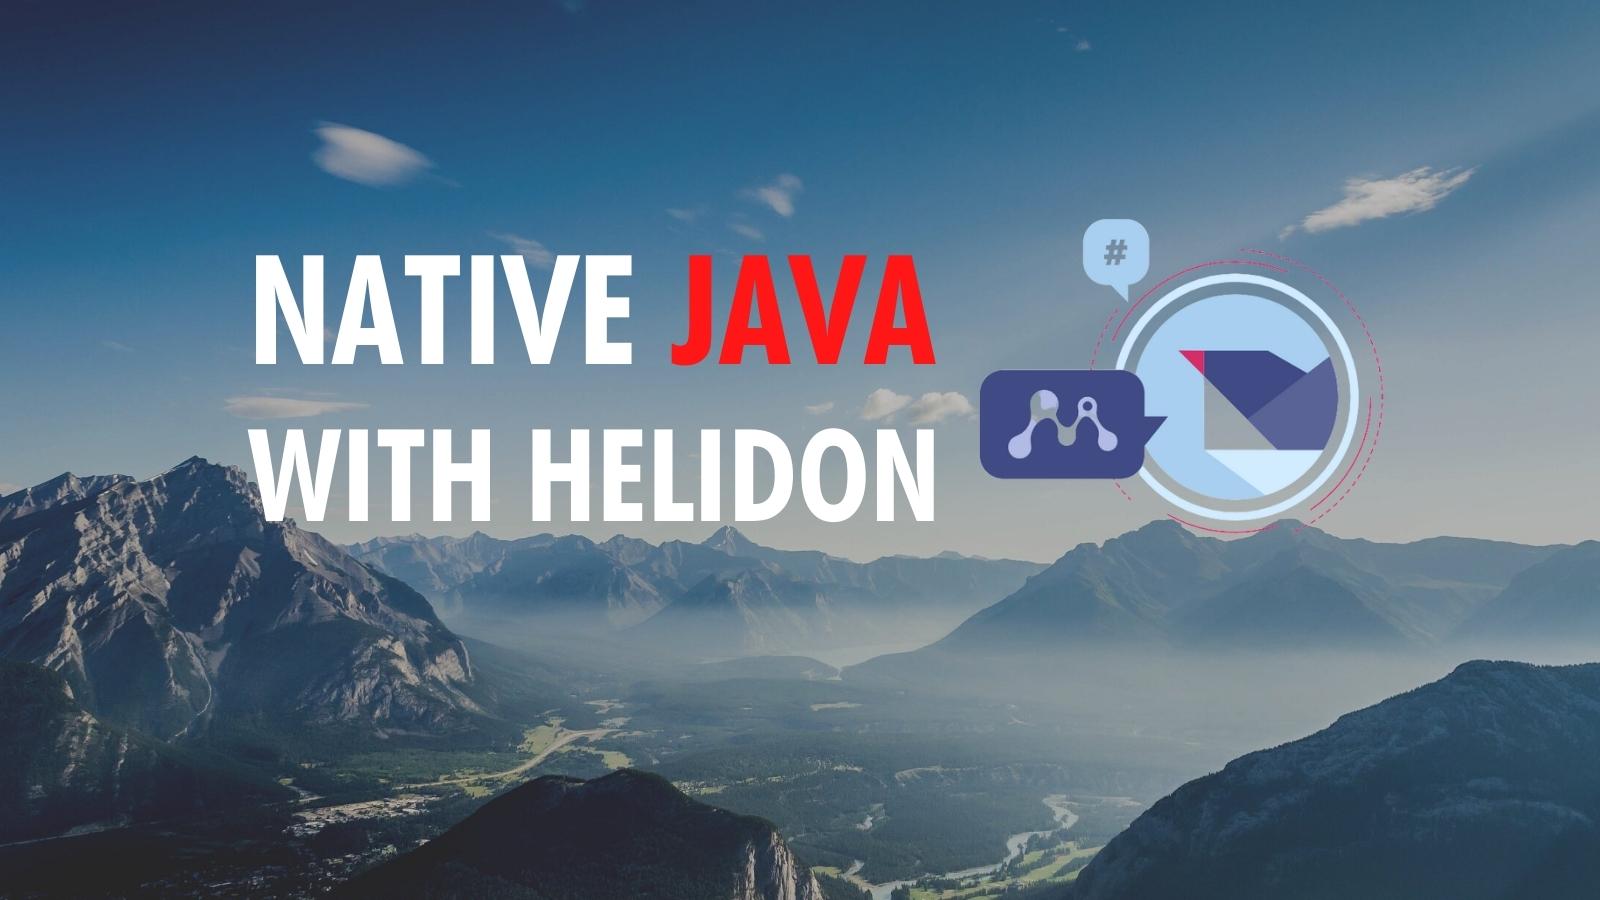 Build REST APIs and Native Java Apps with Helidon